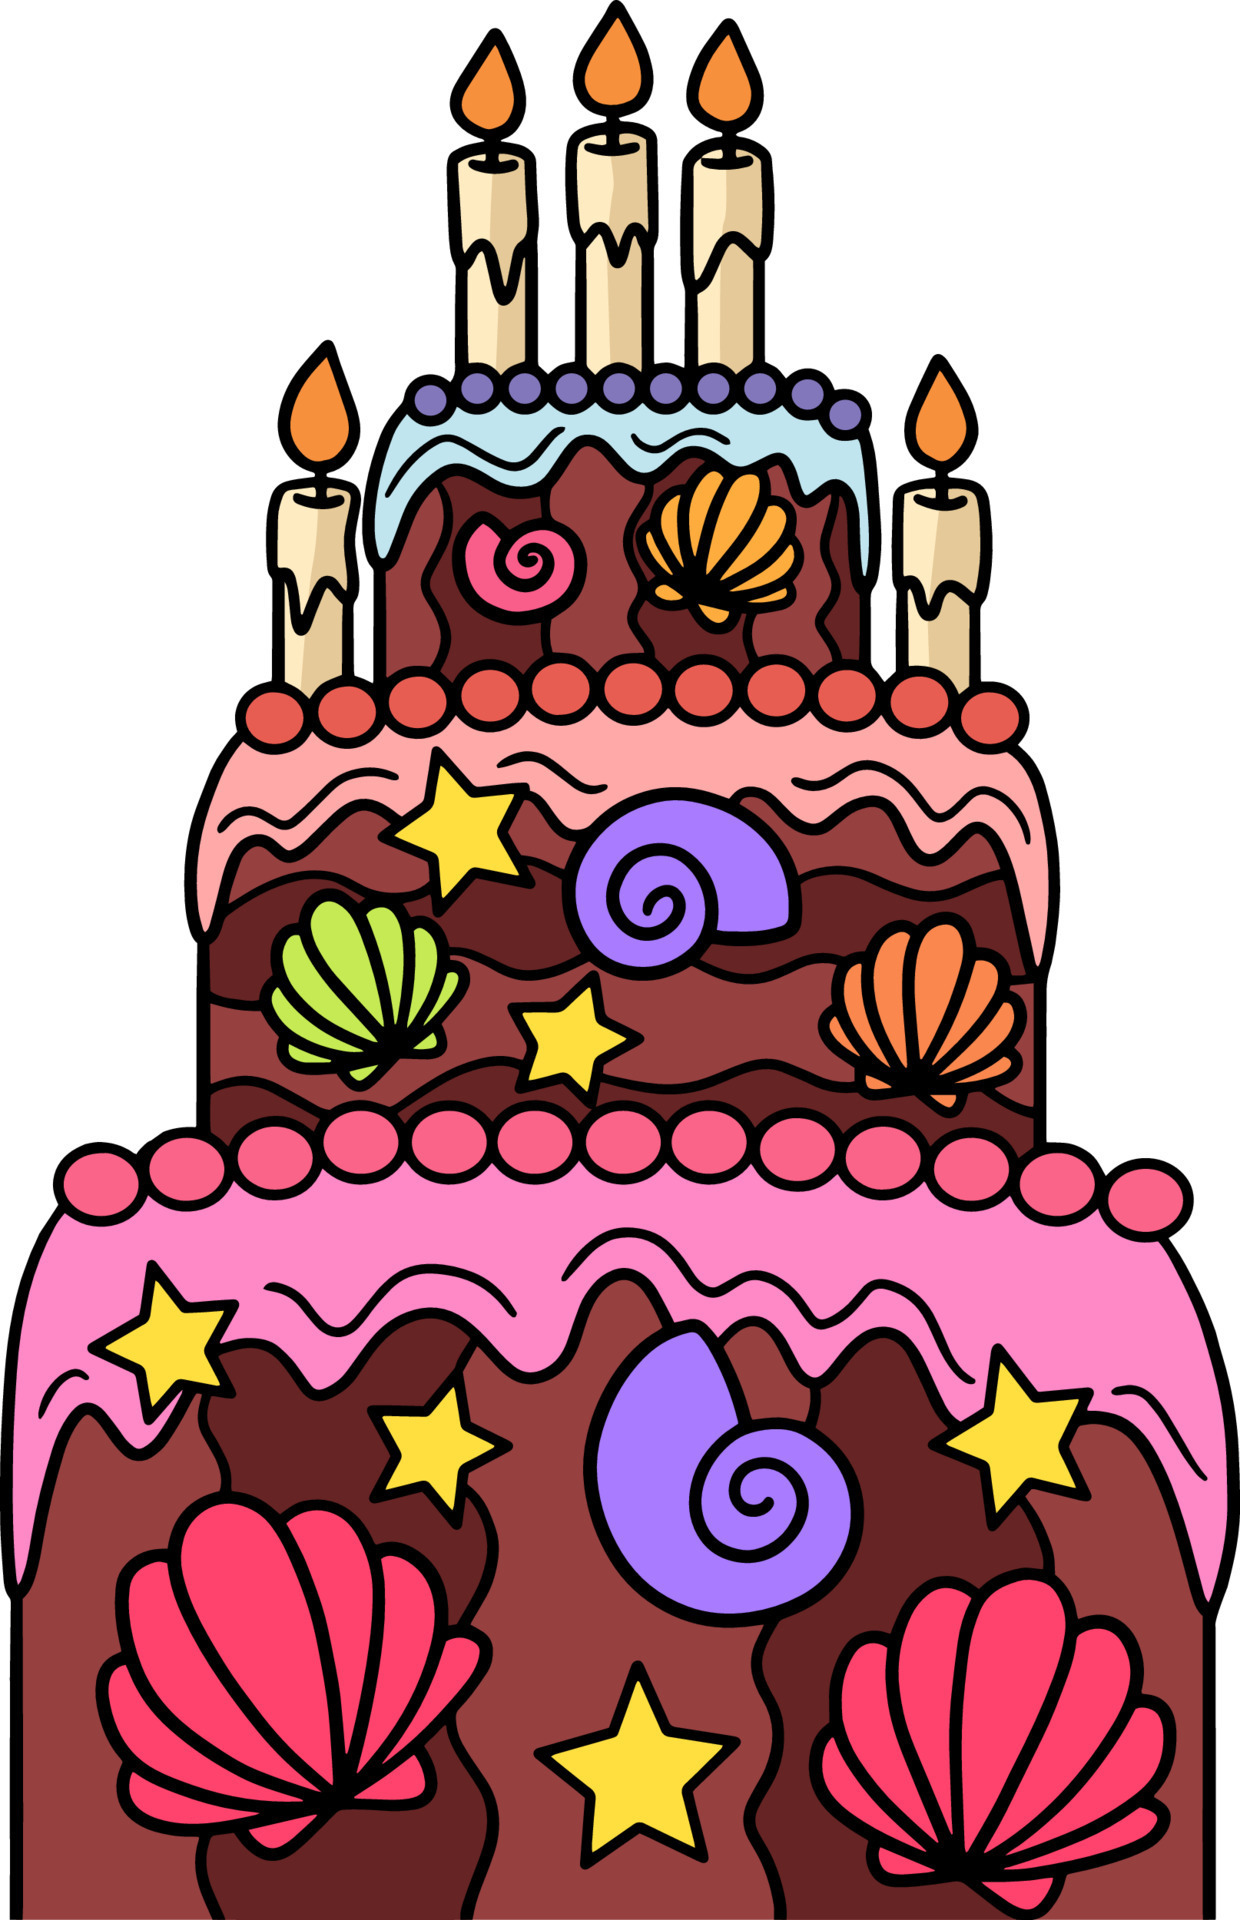 Birthday Cake With Blue Lit Candles Clip Art at Clker.com - vector clip art  online, royalty free & public domain